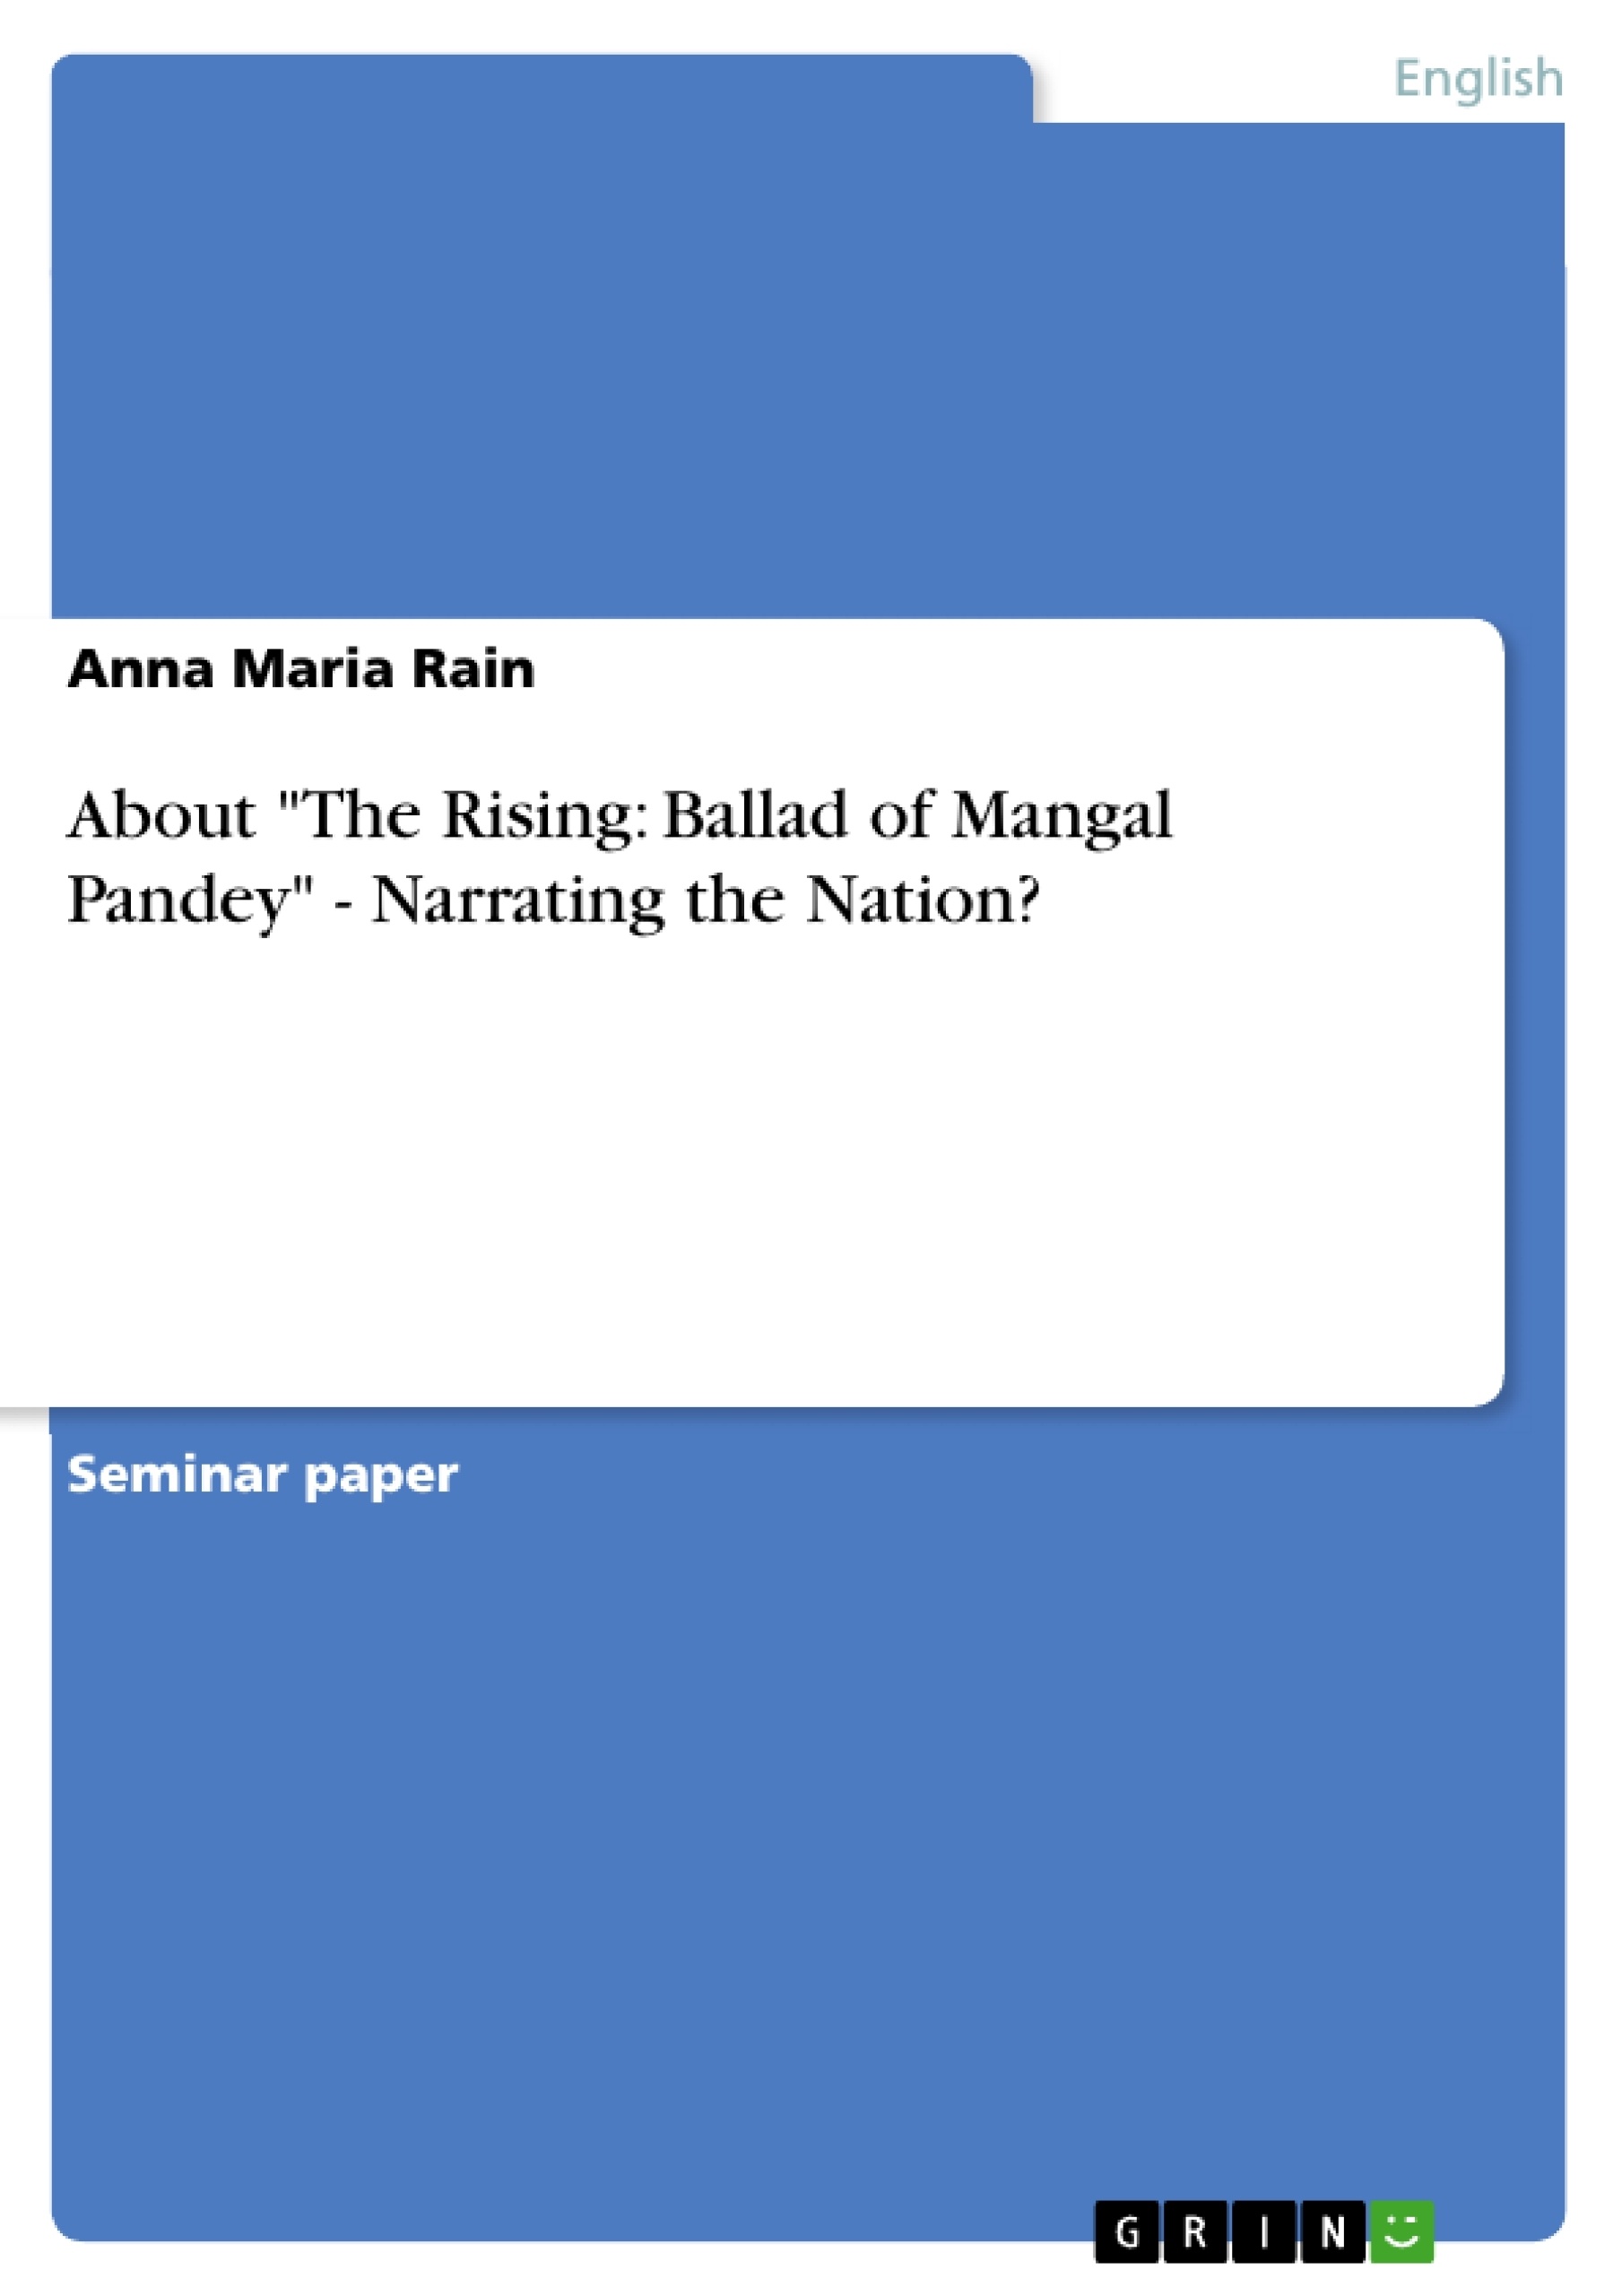 Titel: About "The Rising: Ballad of Mangal Pandey" - Narrating the Nation?